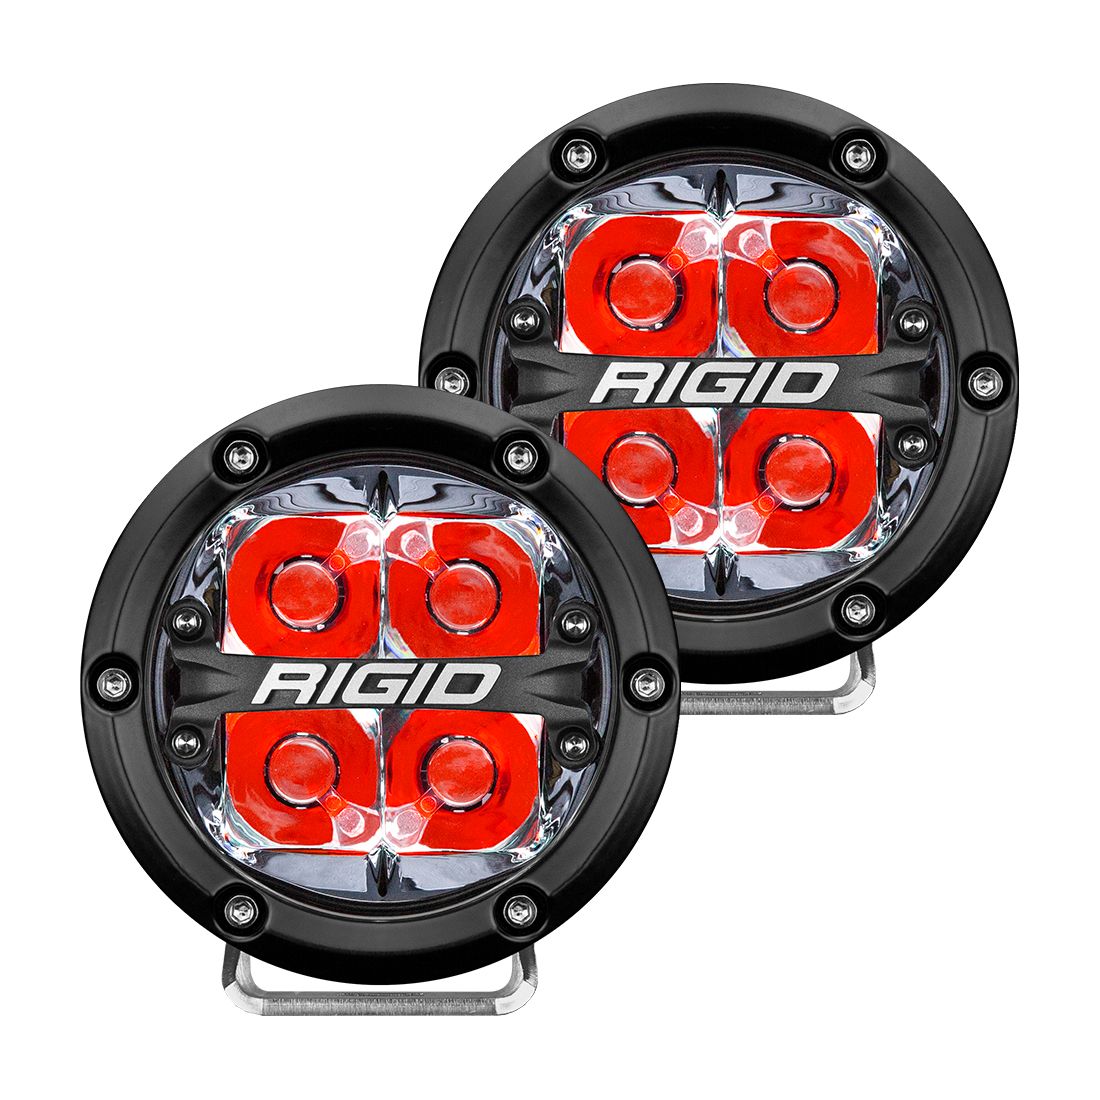 Rigid 360-Series 4 Inch LED Off-Road Spot Optic with Red Backlight Pair - BumperStock